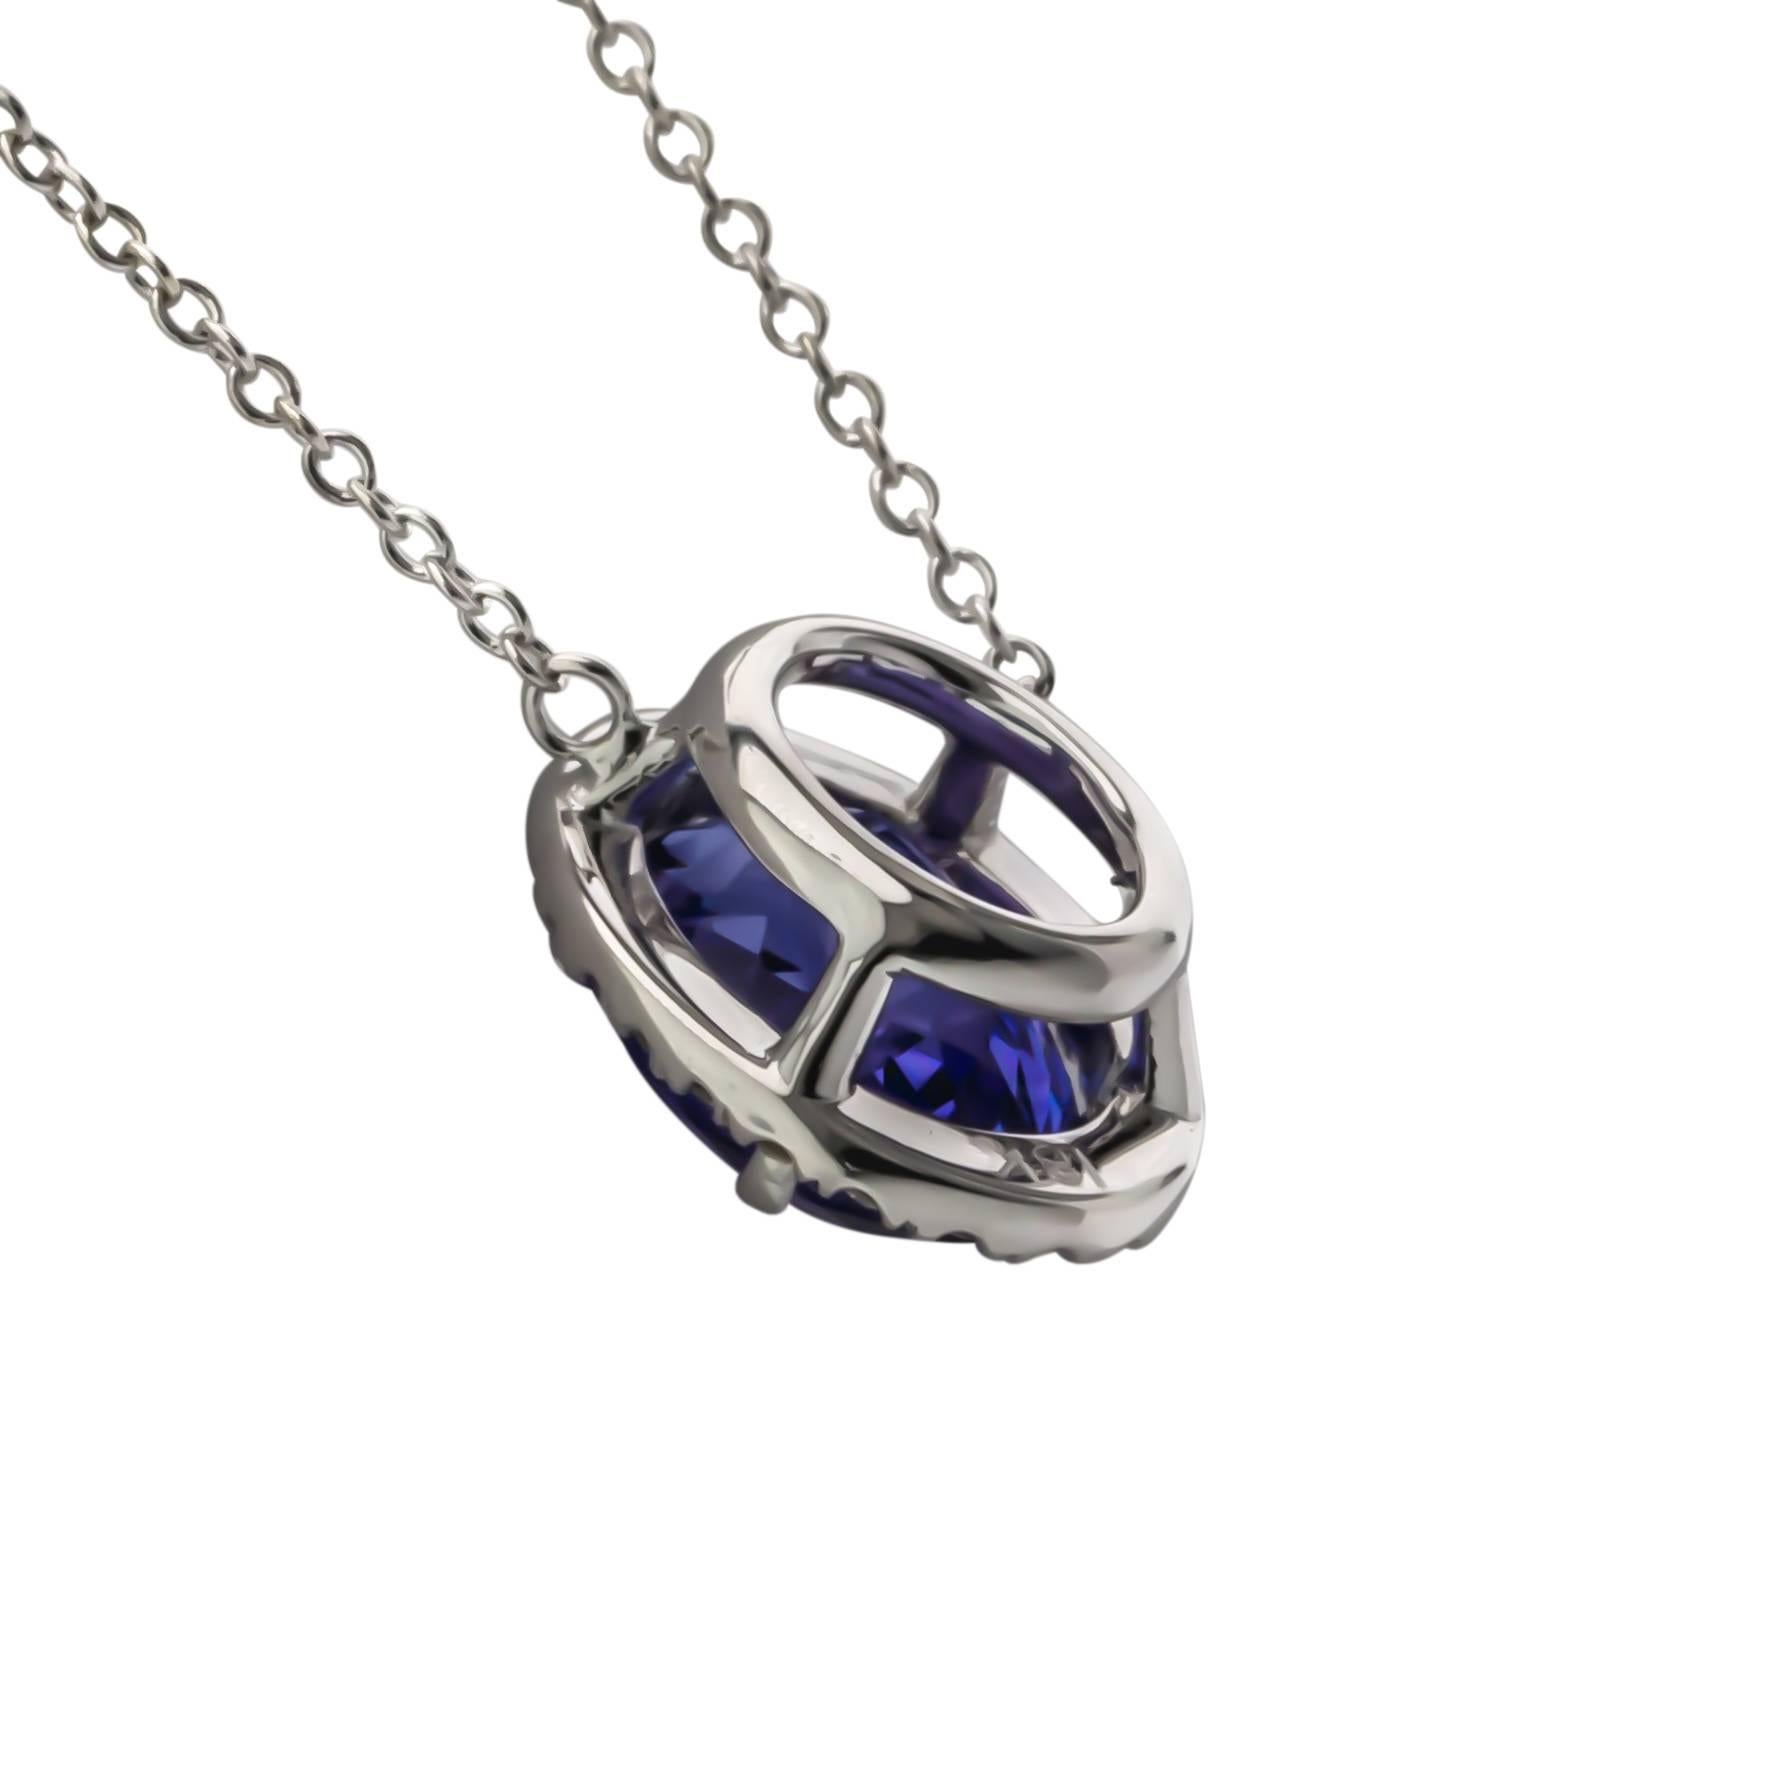 One of a Kind 18K white gold tanzanite and diamond 18" necklace.  Prong set with one oval tanzanite weighing 3.46 carats of fine color and clarity, surrounded by twenty-four round brilliant cut diamonds weighing .18 carats total weight, G color